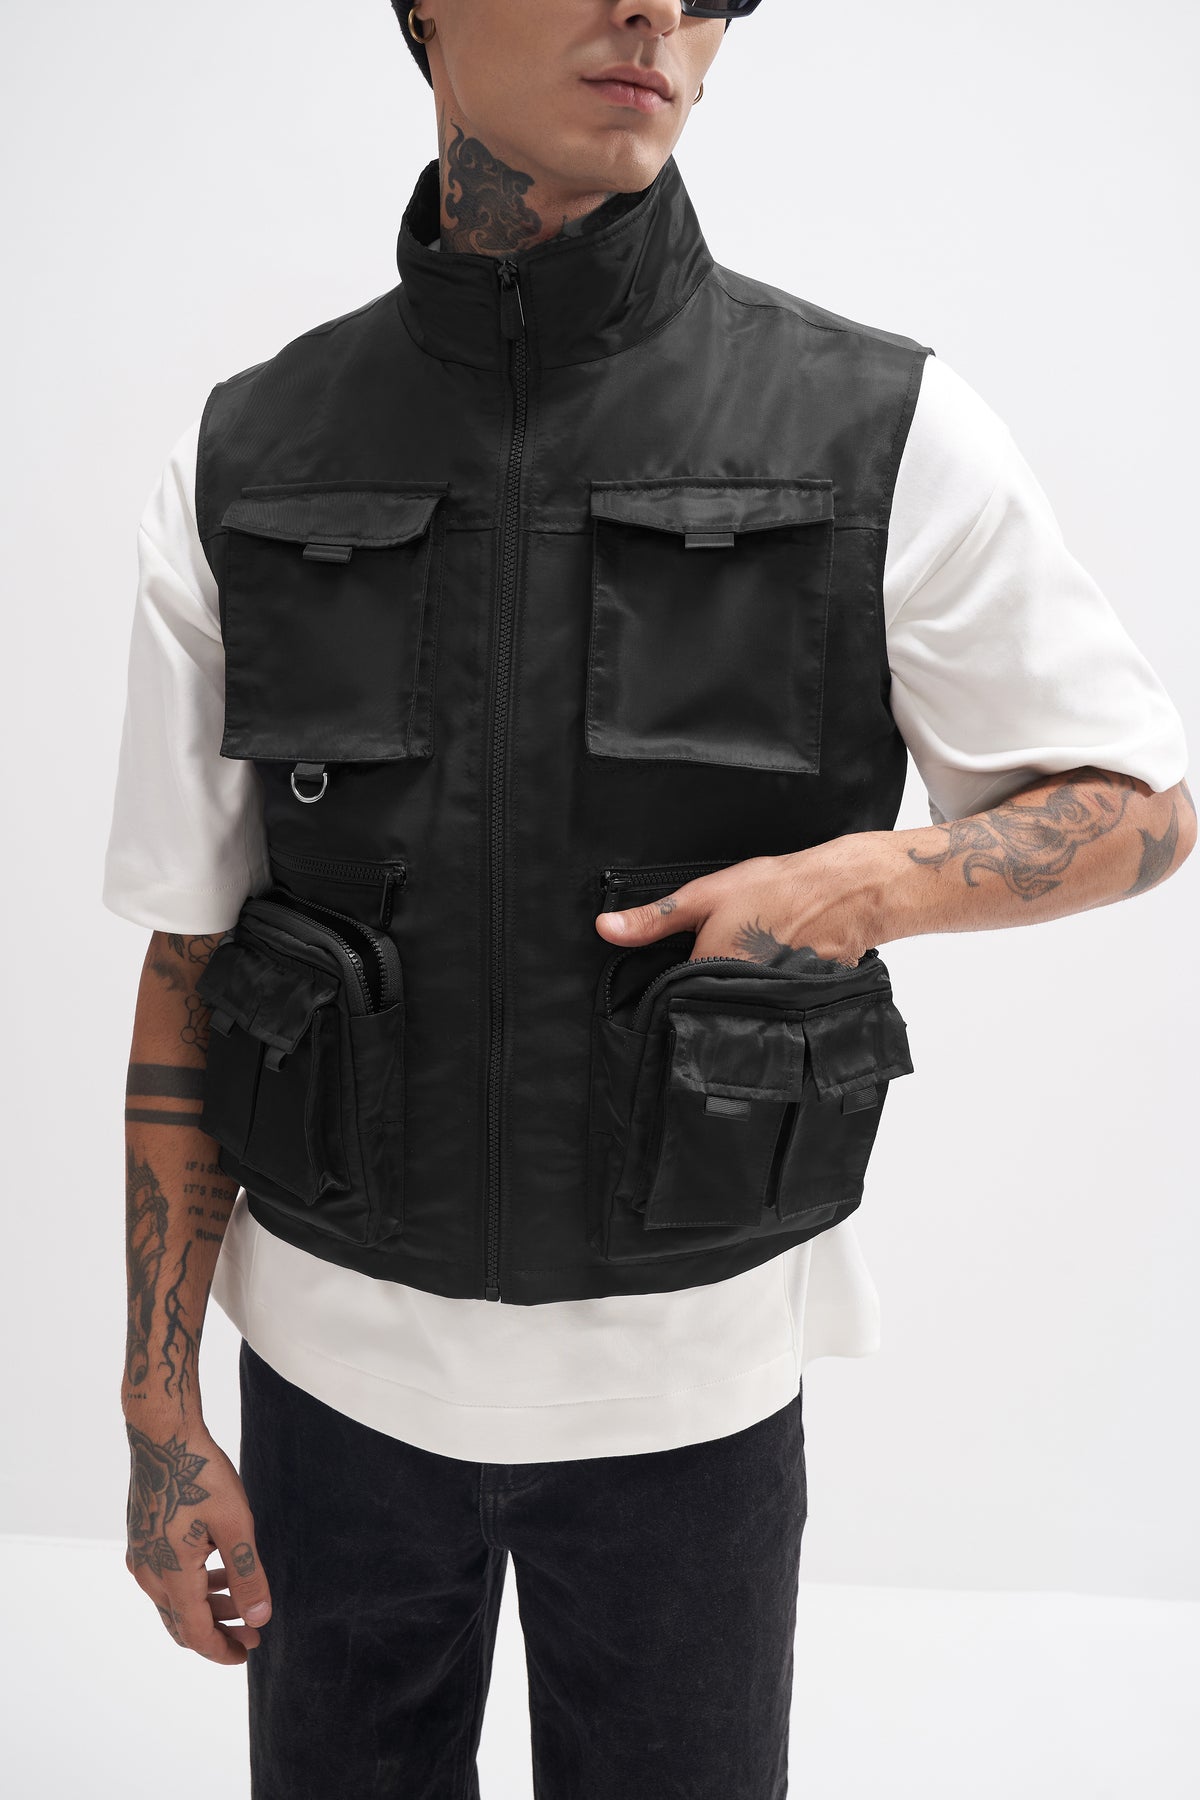 The Workers Club x Dr Reversible Utility Gilet